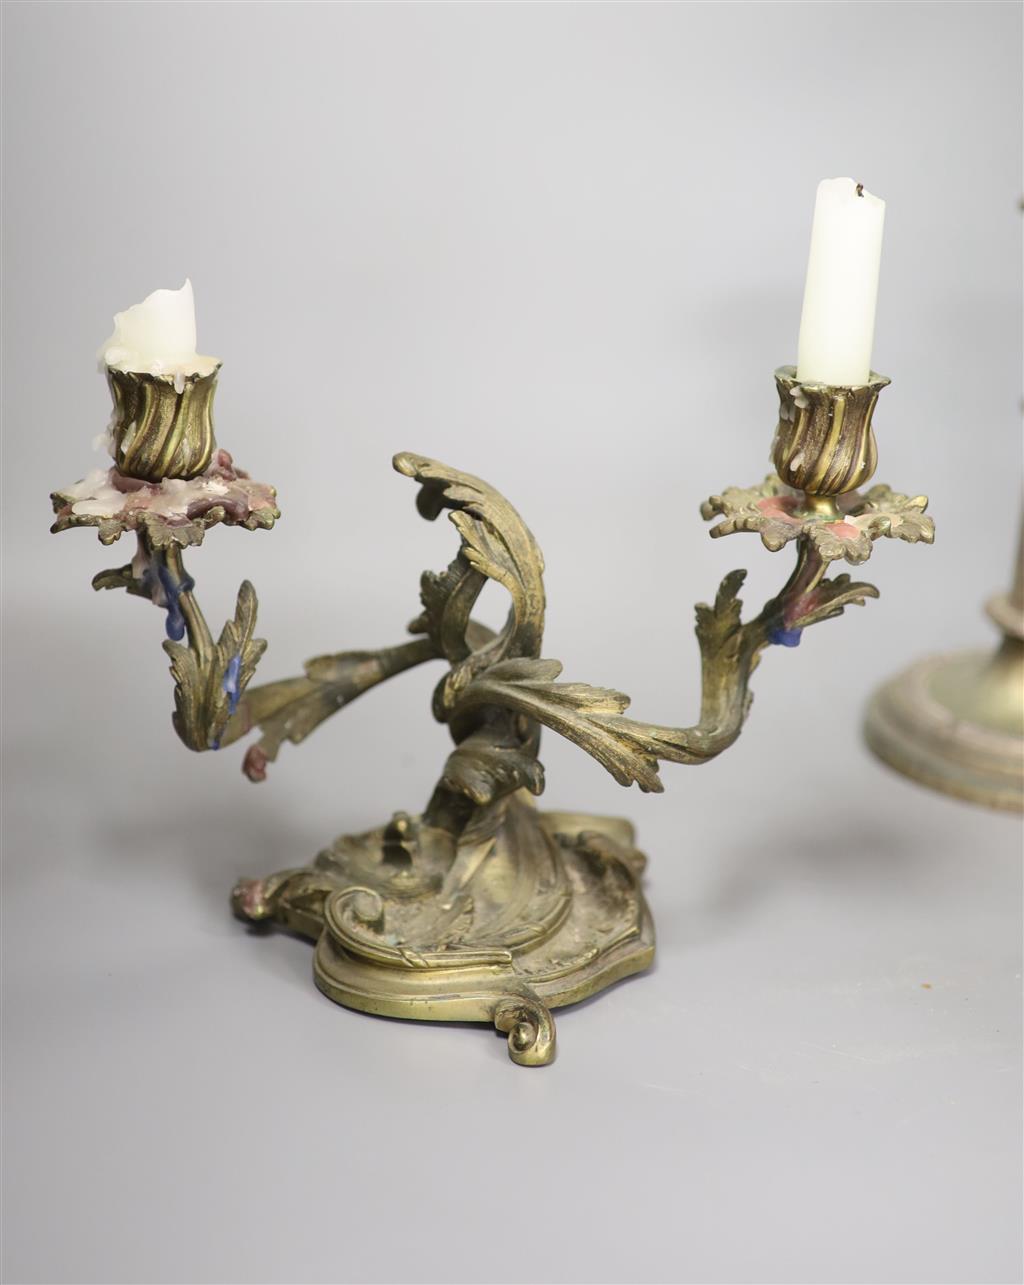 A pair of bronze rococo-style candelabra, width 25cm and a pair of telescopic candlesticks